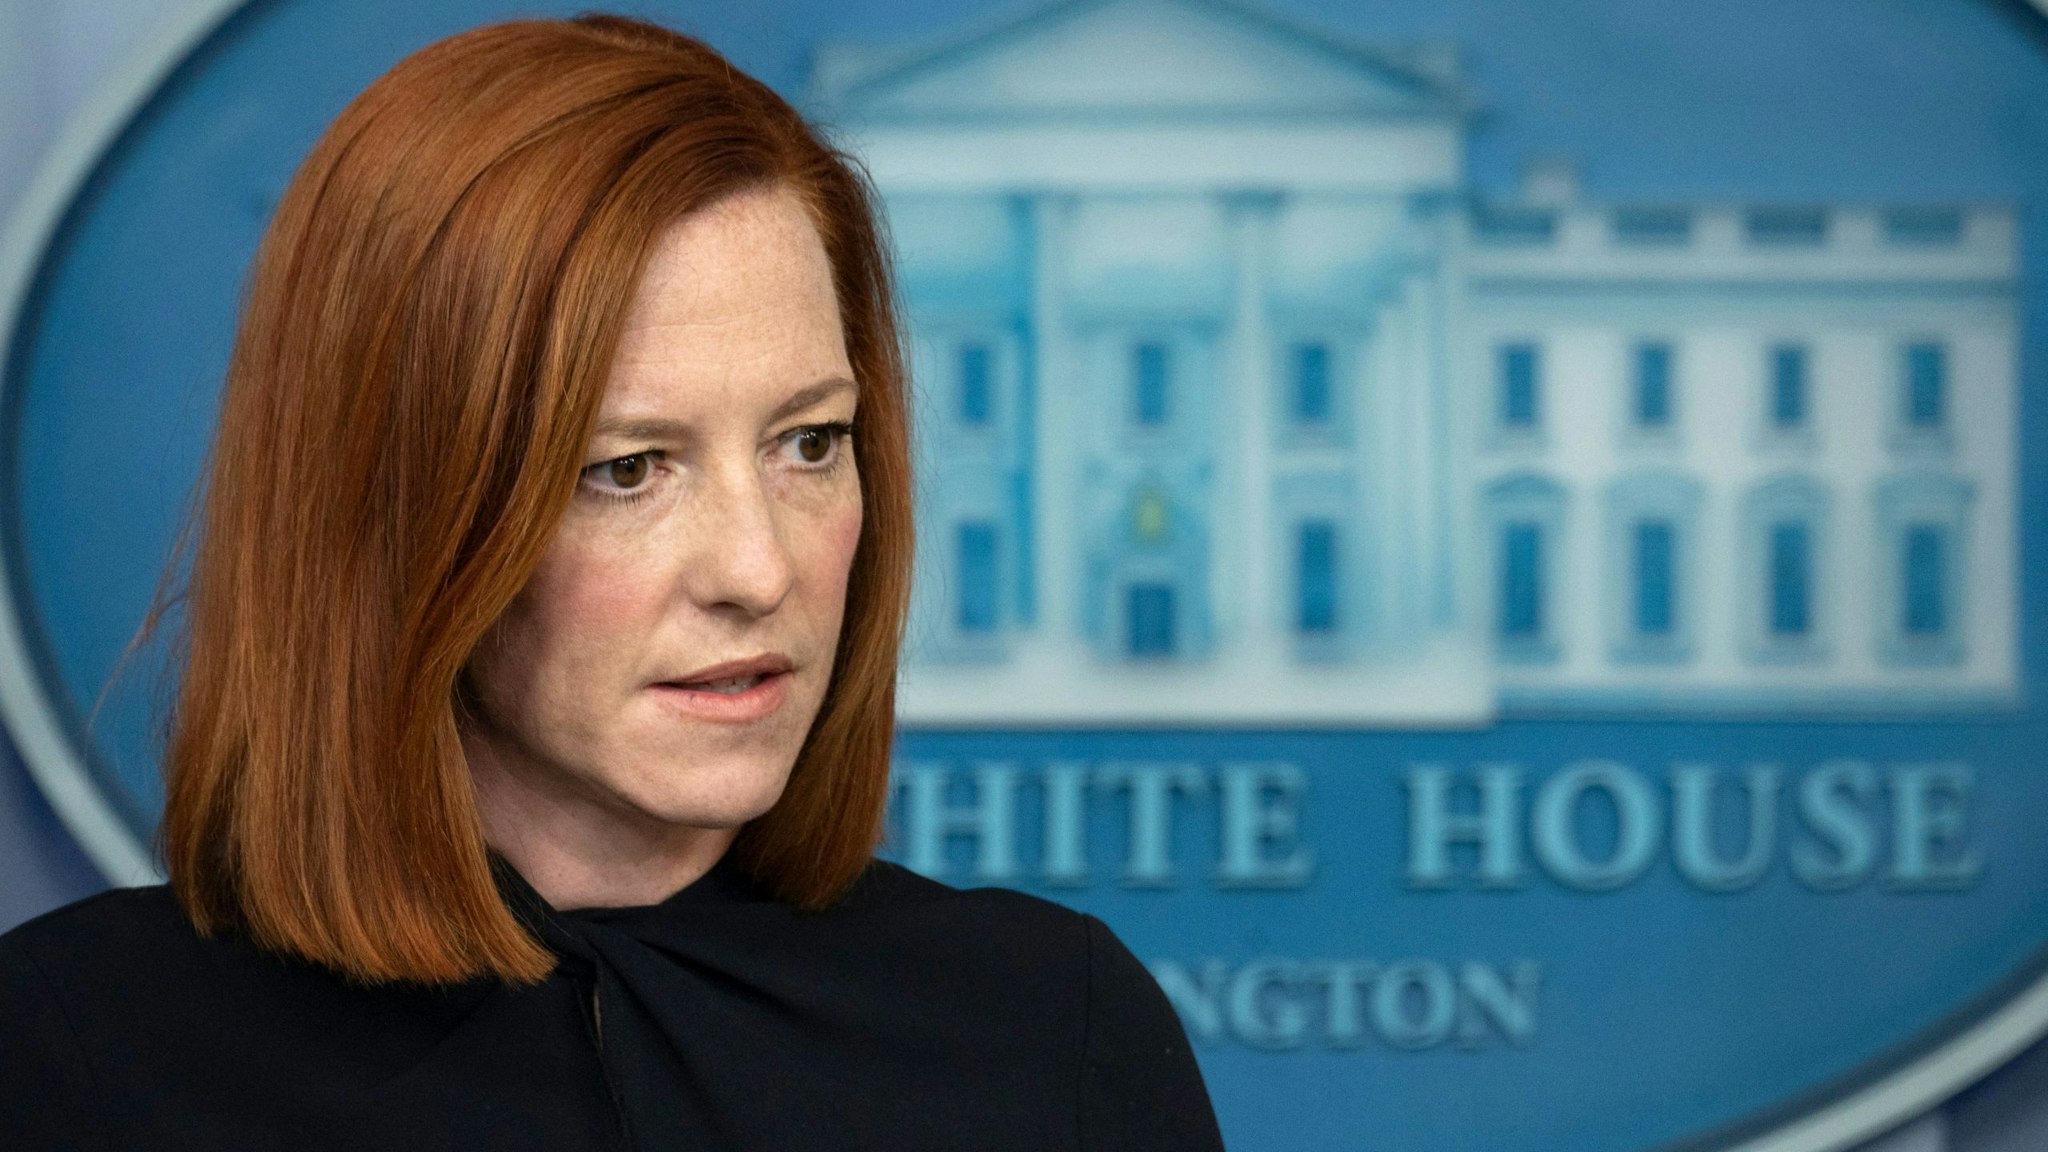 White House Press Secretary Jen Psaki speaks during the daily press briefing on April 1, 2021, in the Brady Briefing Room of the White House in Washington, DC.